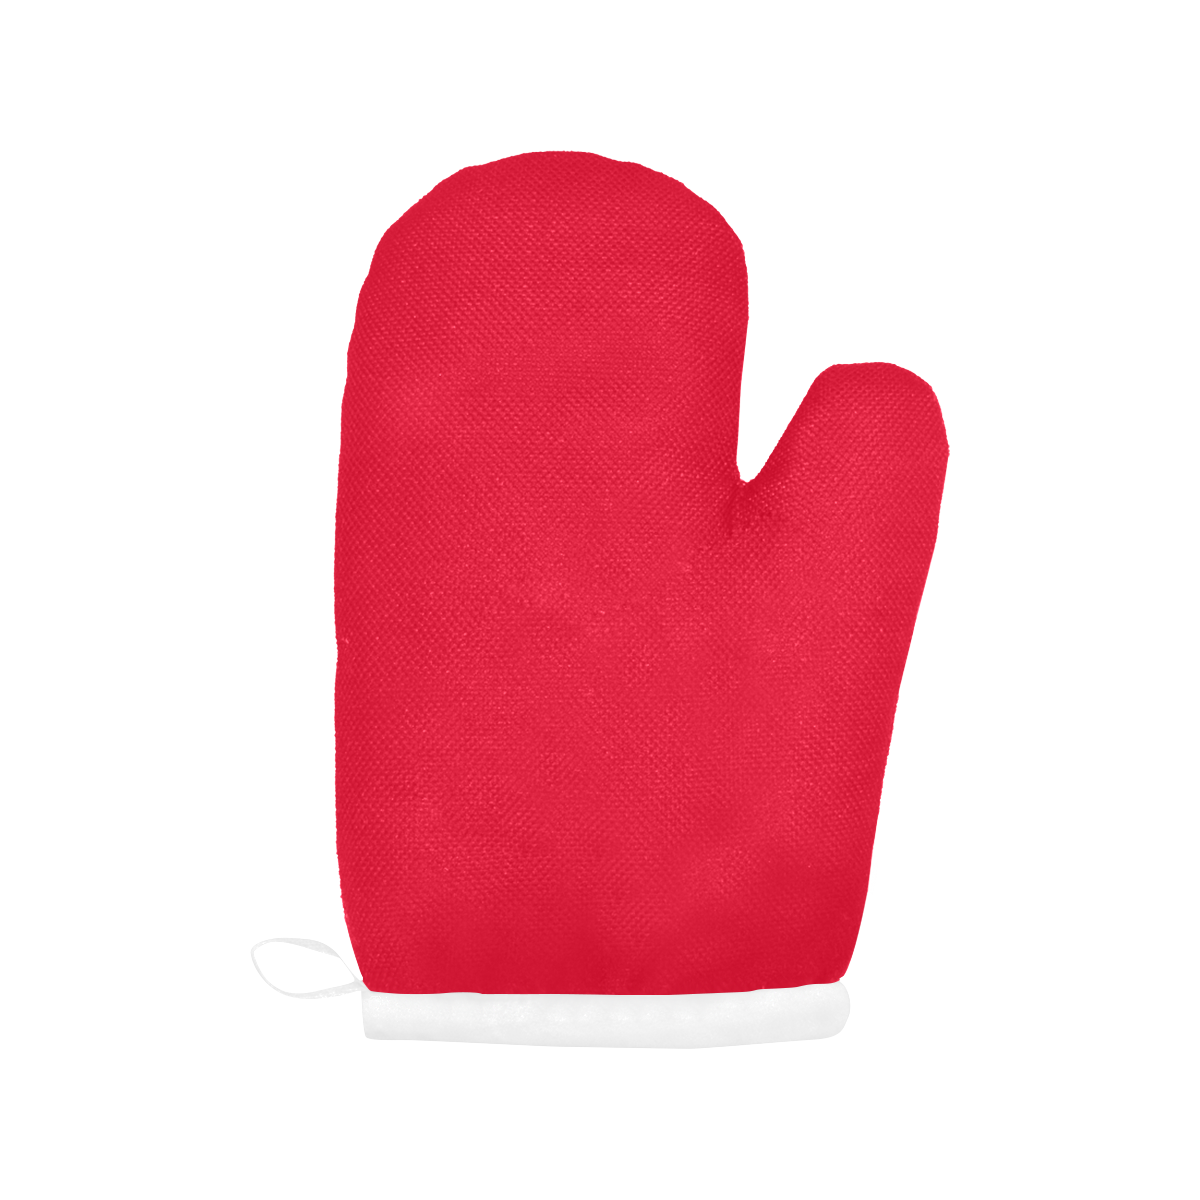 color Spanish red Oven Mitt